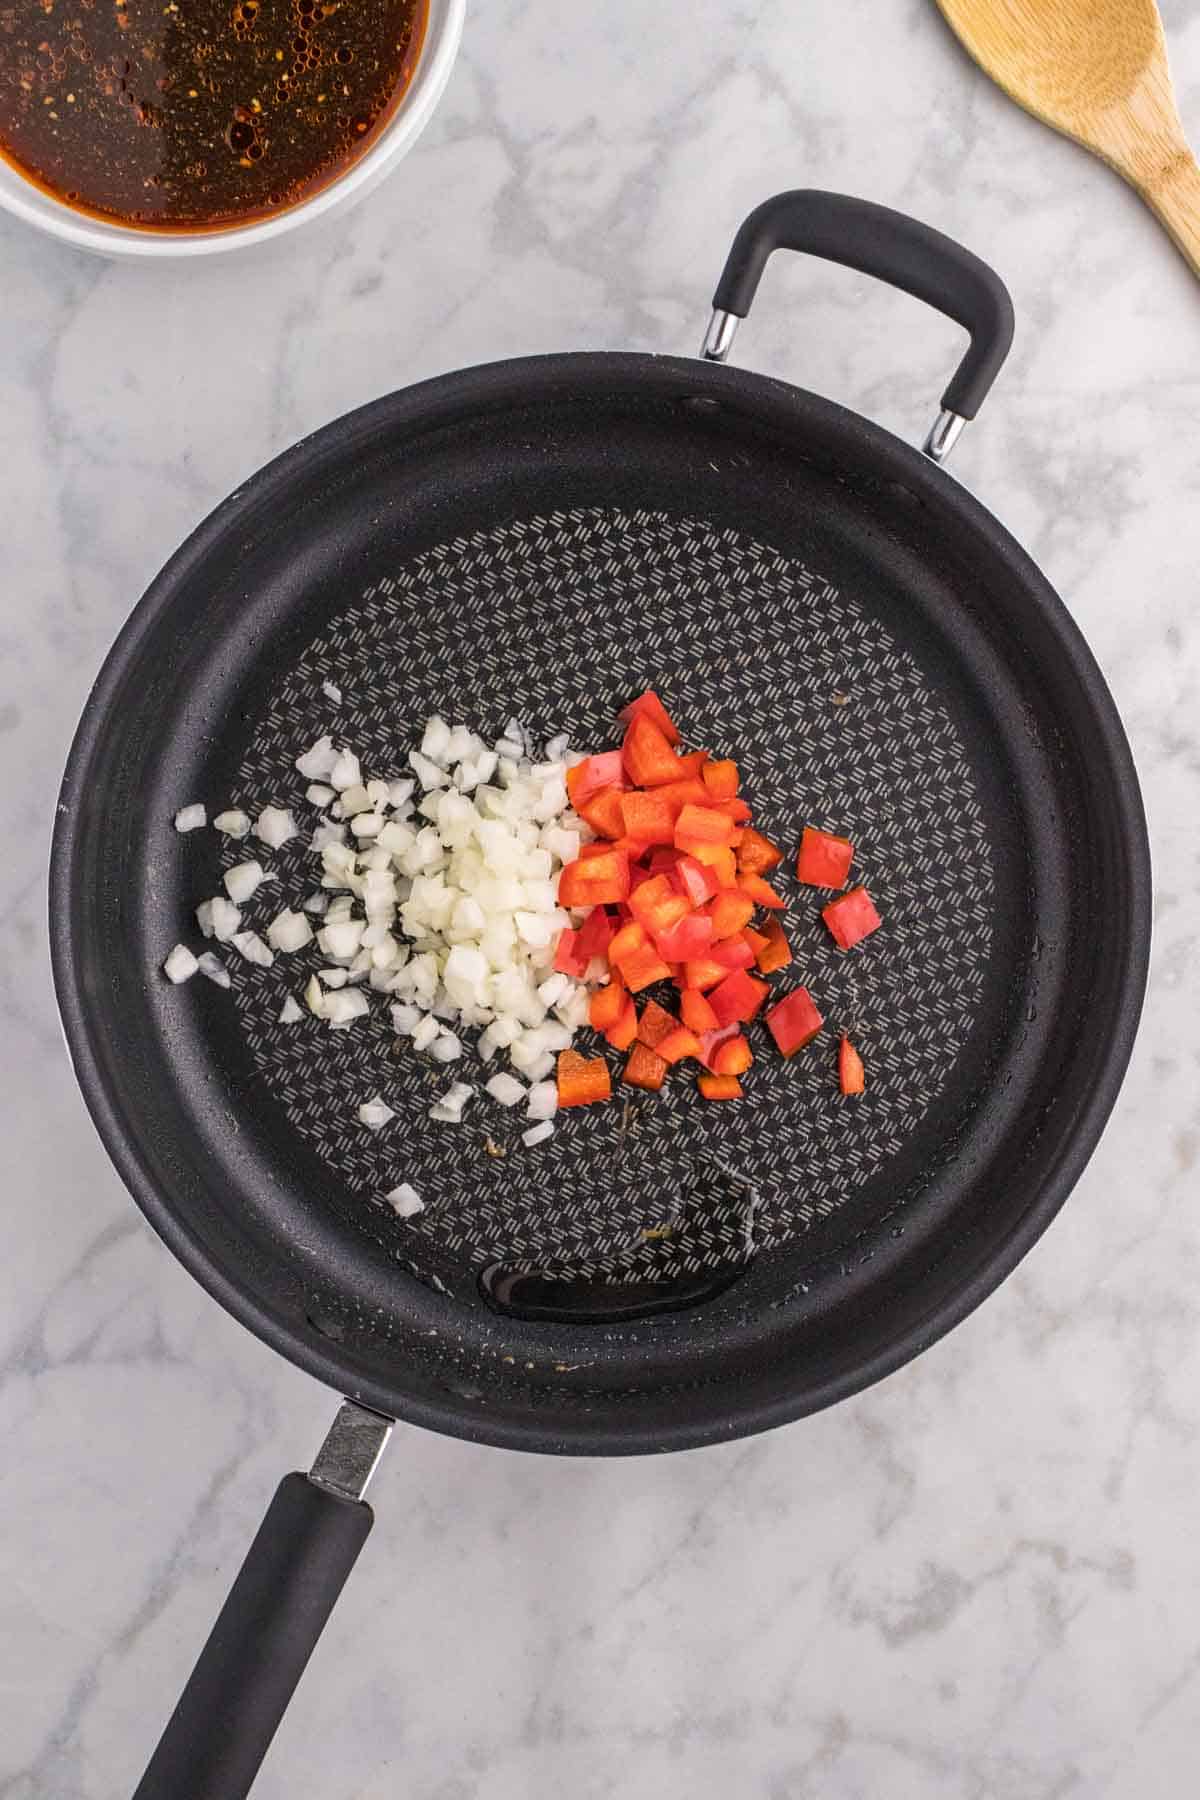 diced onions and red bell peppers in a skillet